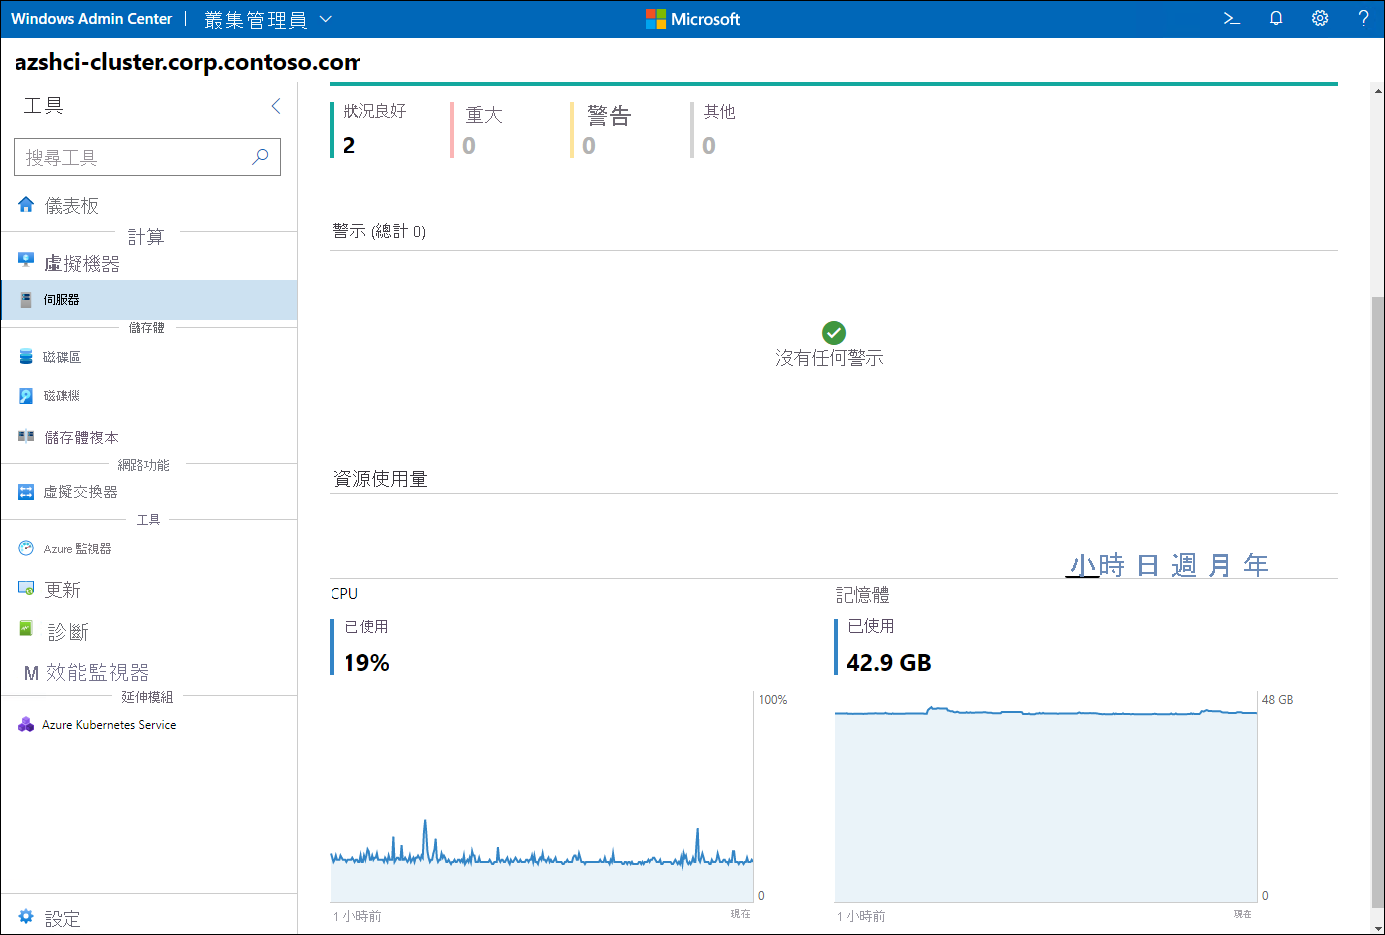 The screenshot depicts the Windows Admin Center dashboard displaying information about the status and performance of cluster nodes.